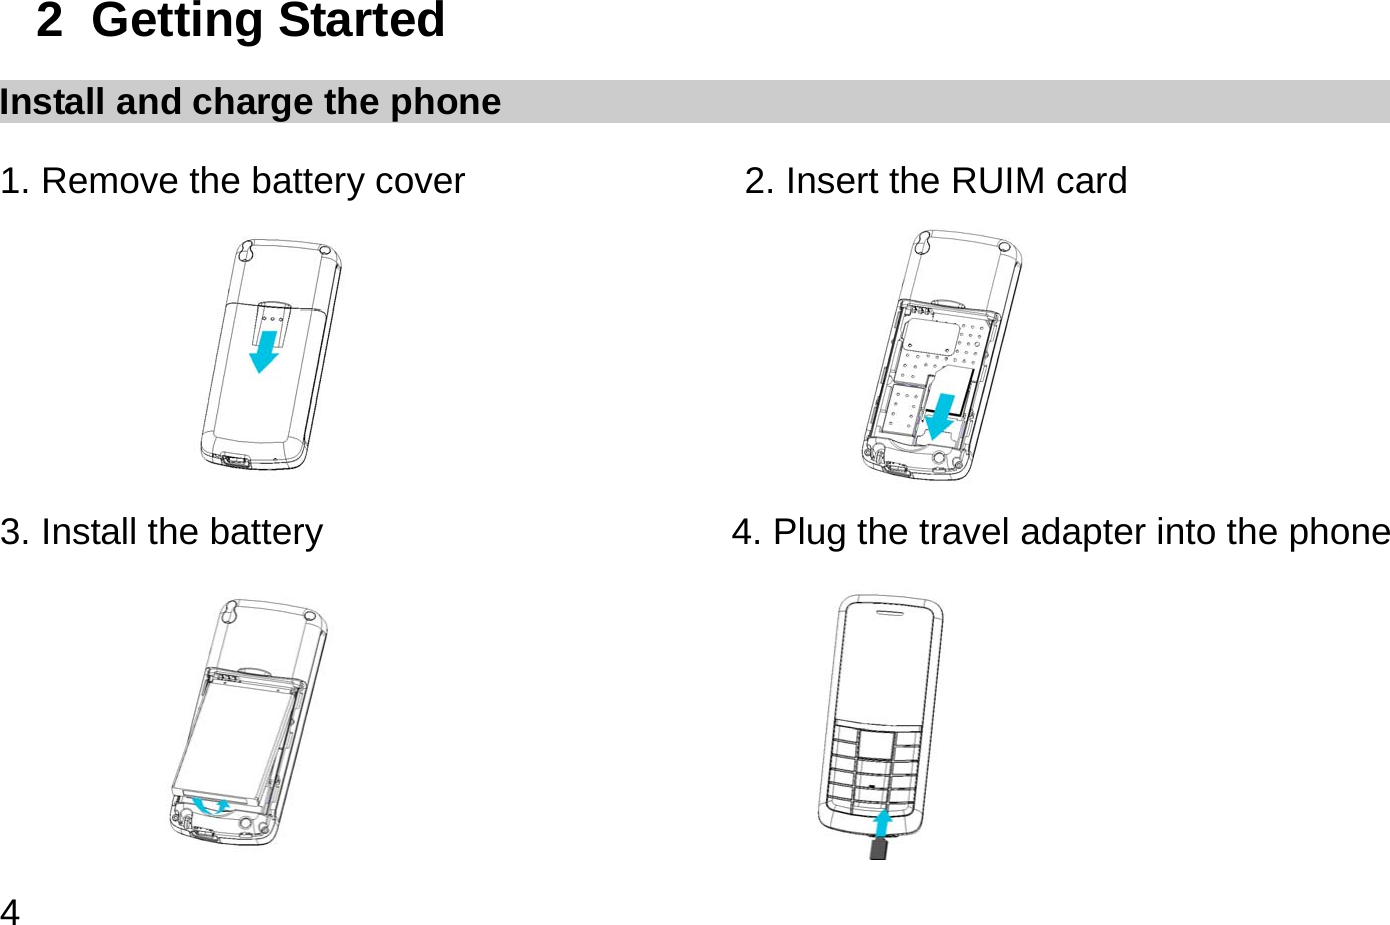  4 2  Getting Started Install and charge the phone 1. Remove the battery cover               2. Insert the RUIM card                                     3. Install the battery                           4. Plug the travel adapter into the phone                           